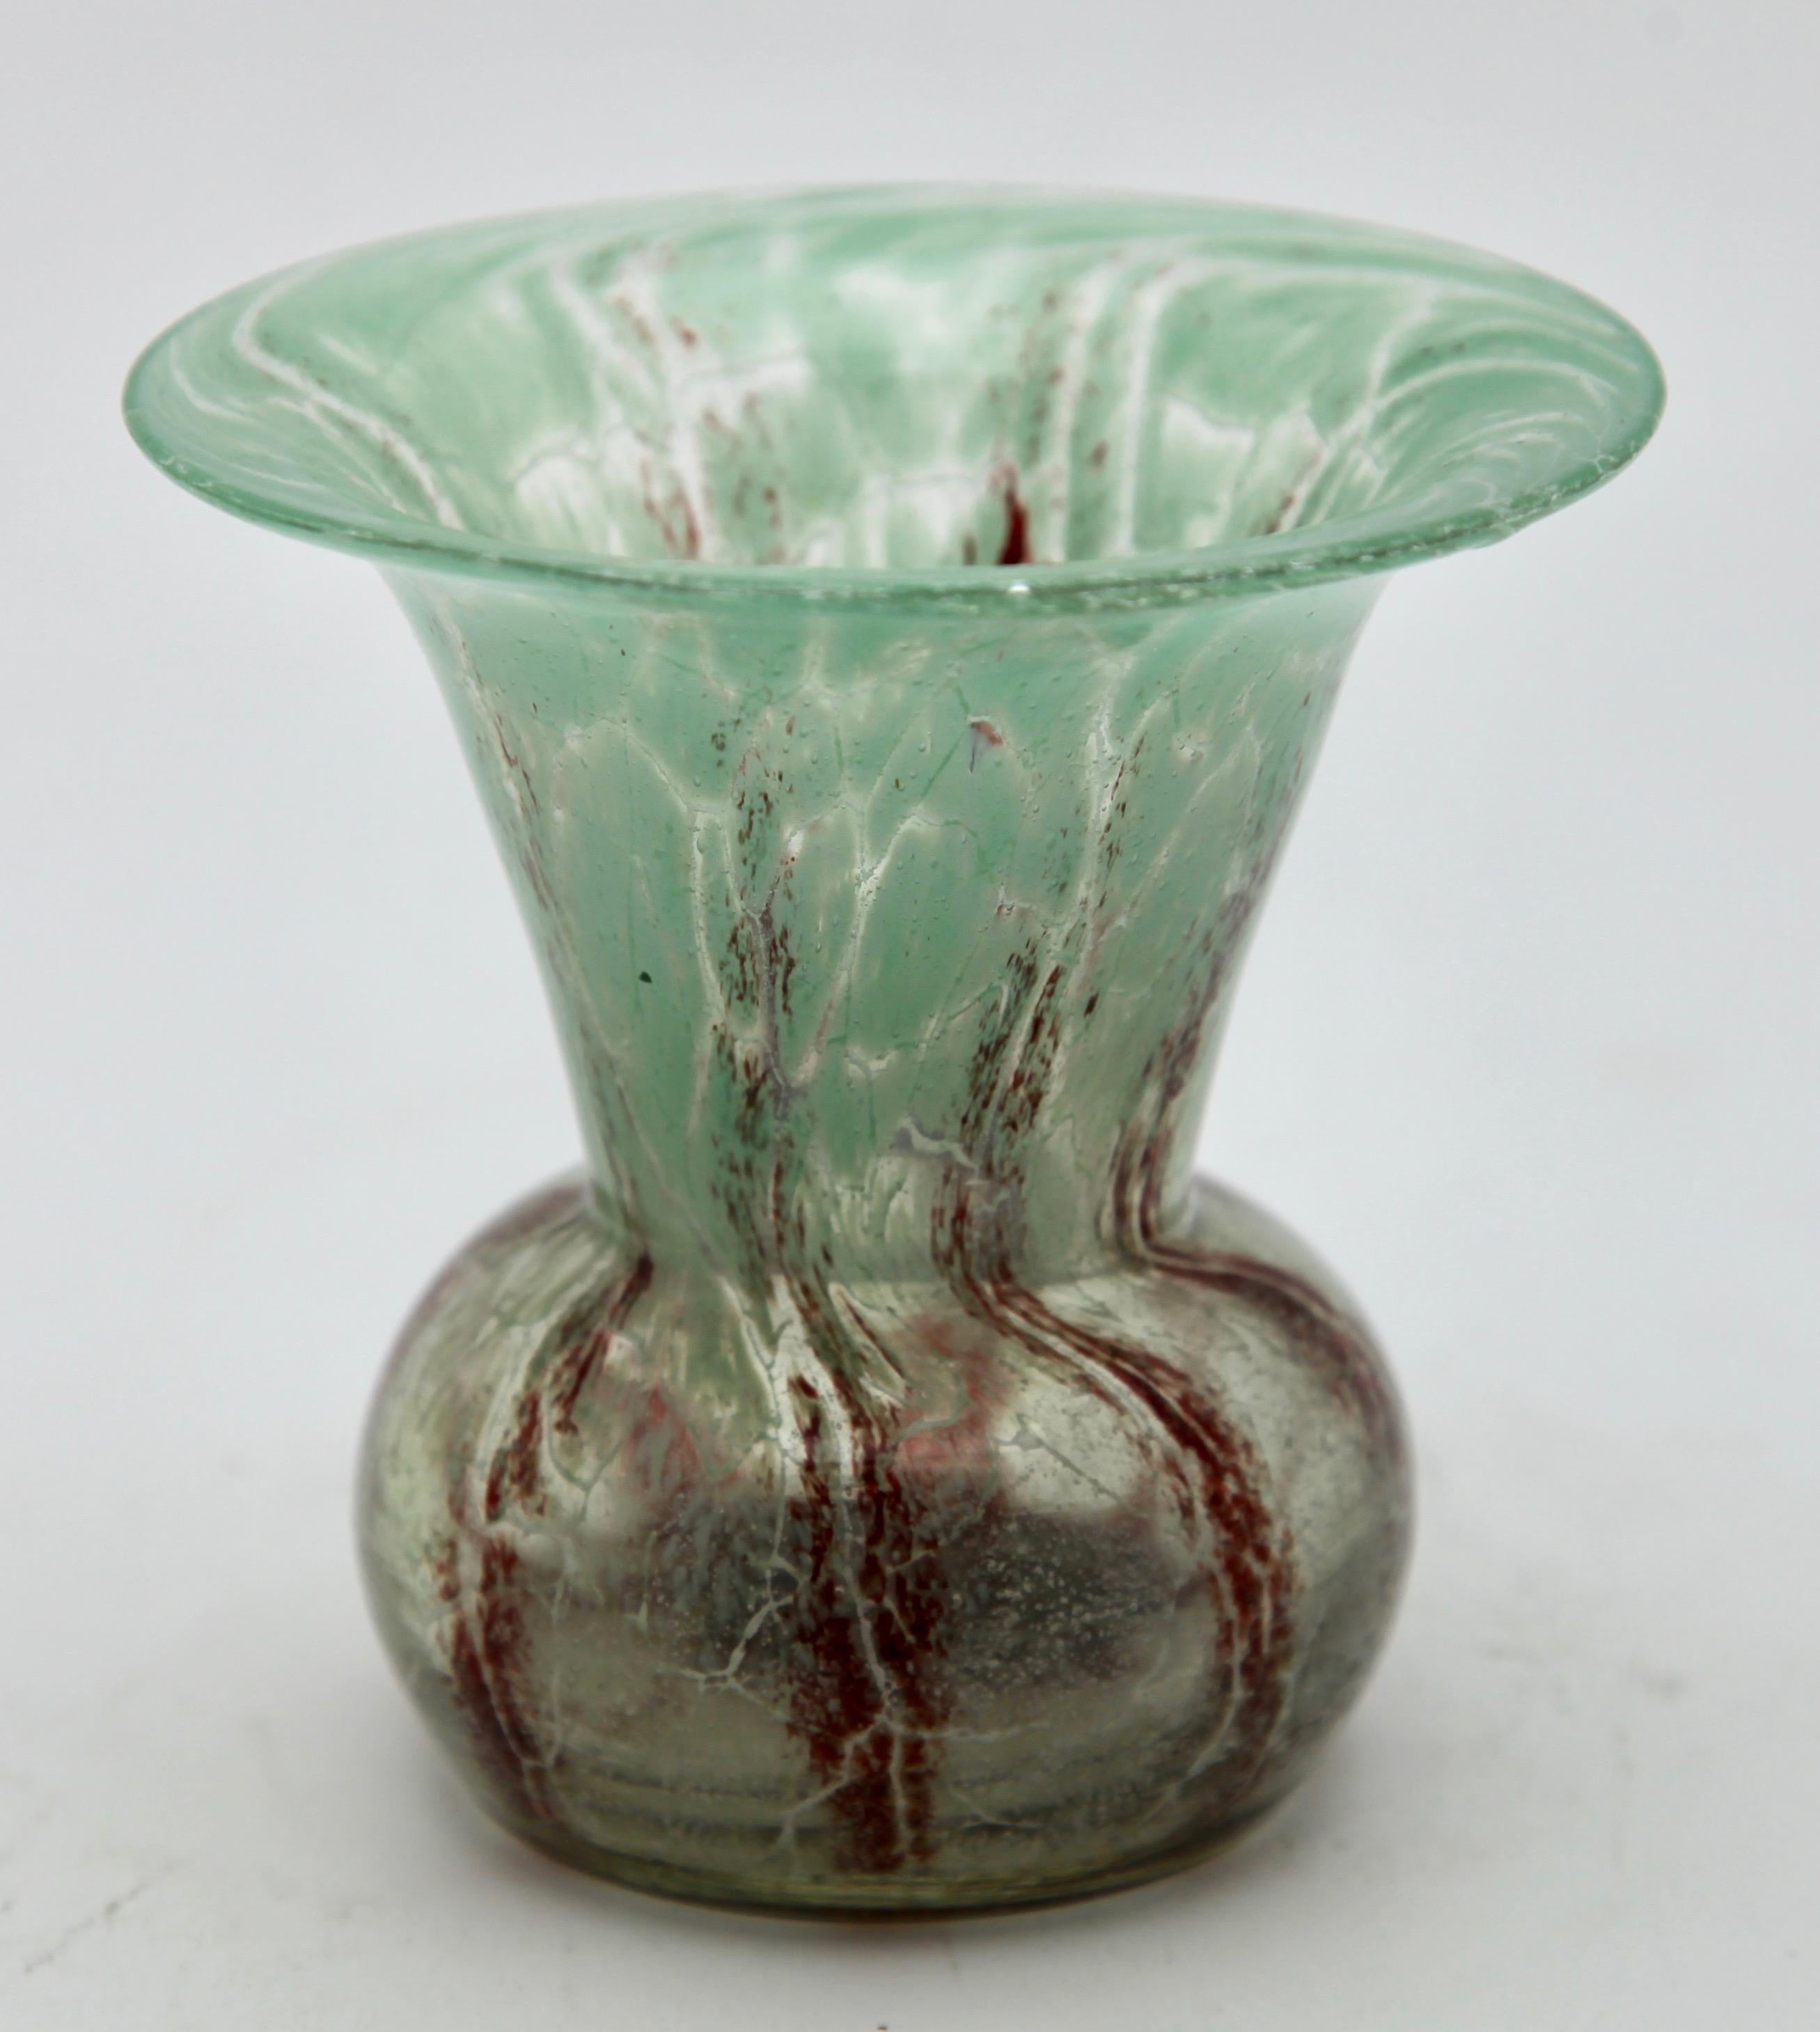 'Ikora' Art Glass Vase, Produced, by WMF in Germany, 1930s by Karl Wiedmann For Sale 1